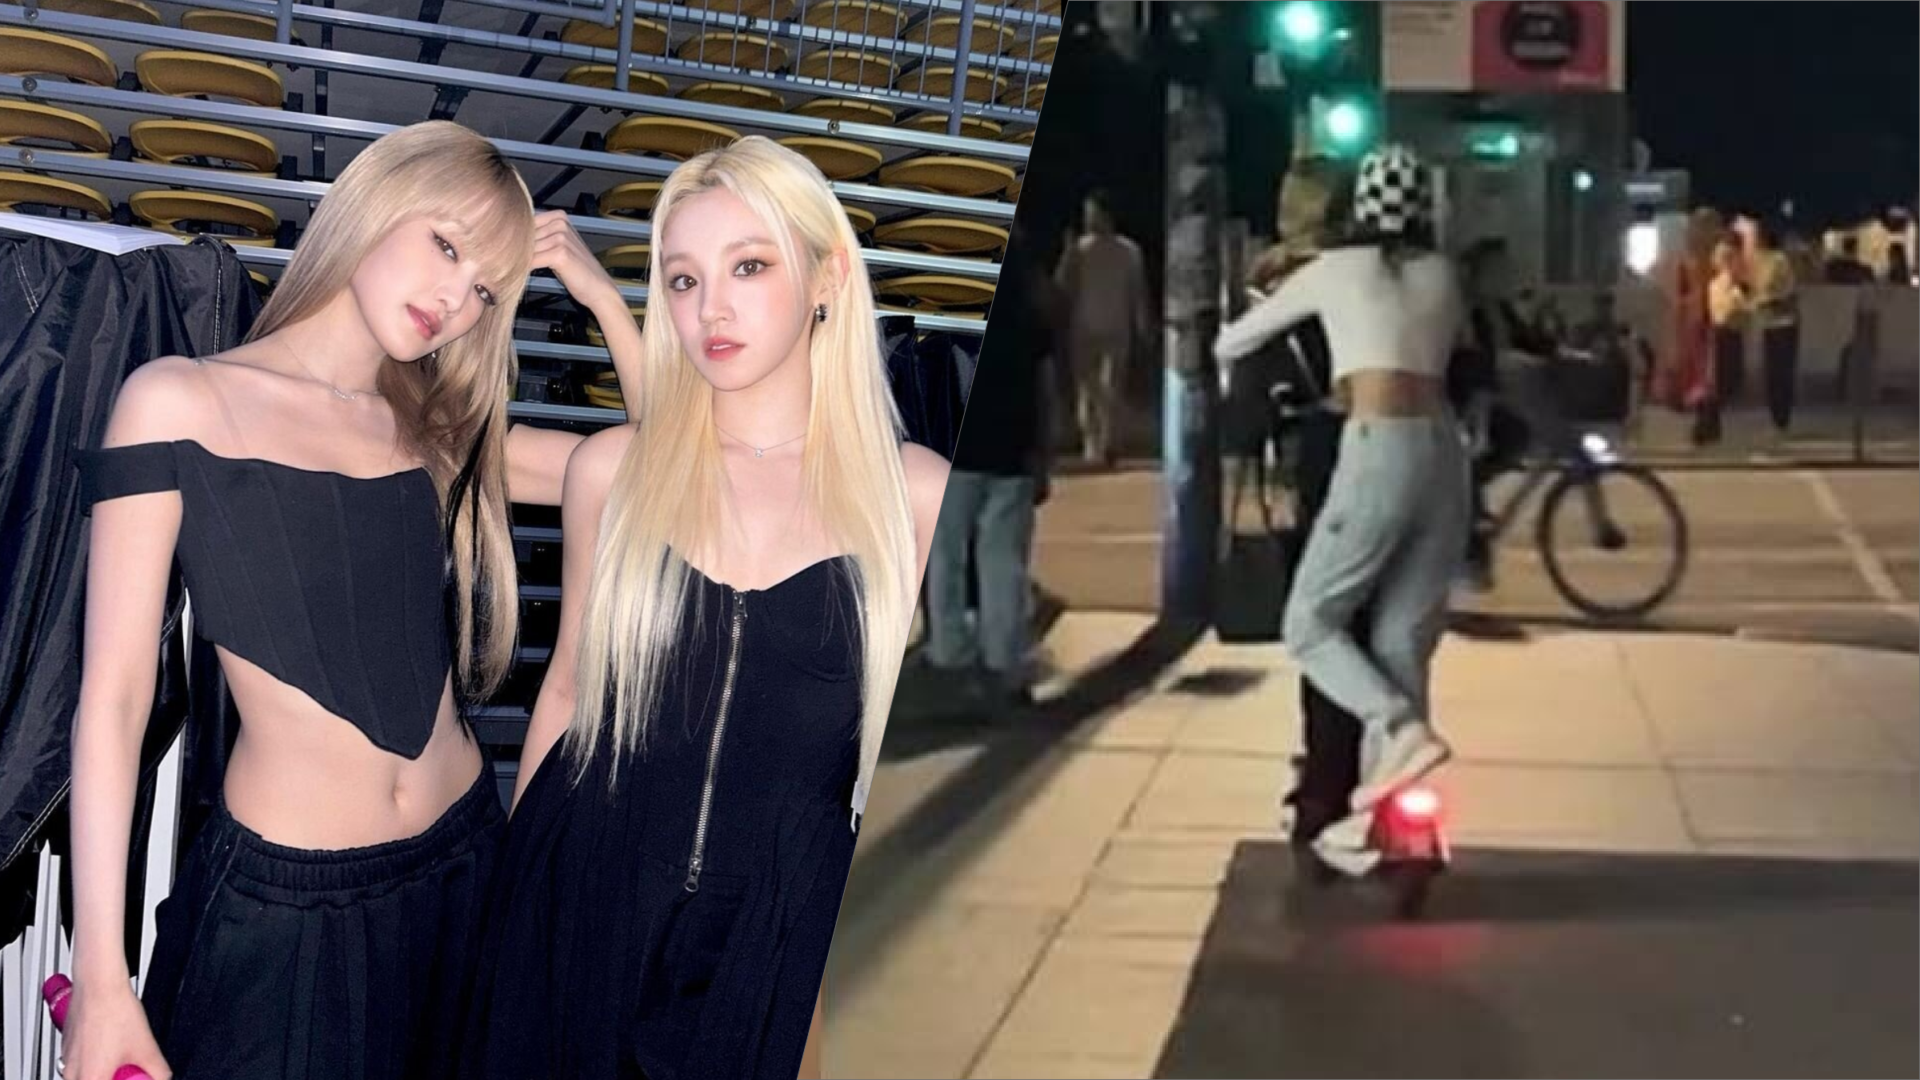 (G)I-DLE Yuqi and Minnie Riding an Electric Kickboard Sparks Debate Among Netizens - BlurStory